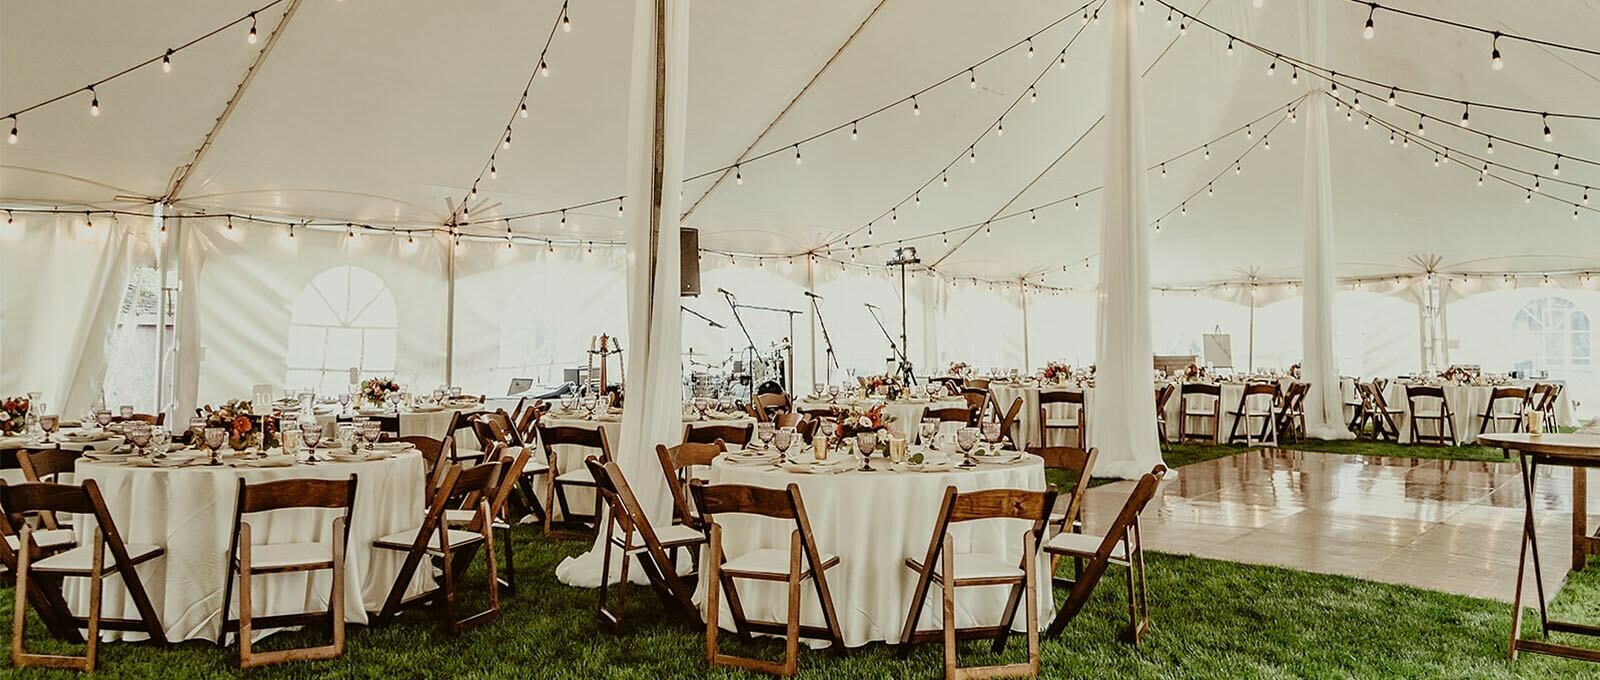 Special Event Rentals - Red Deer showcases an event reception with round tables, walnut folding chairs, and dance floor under a big pole tent